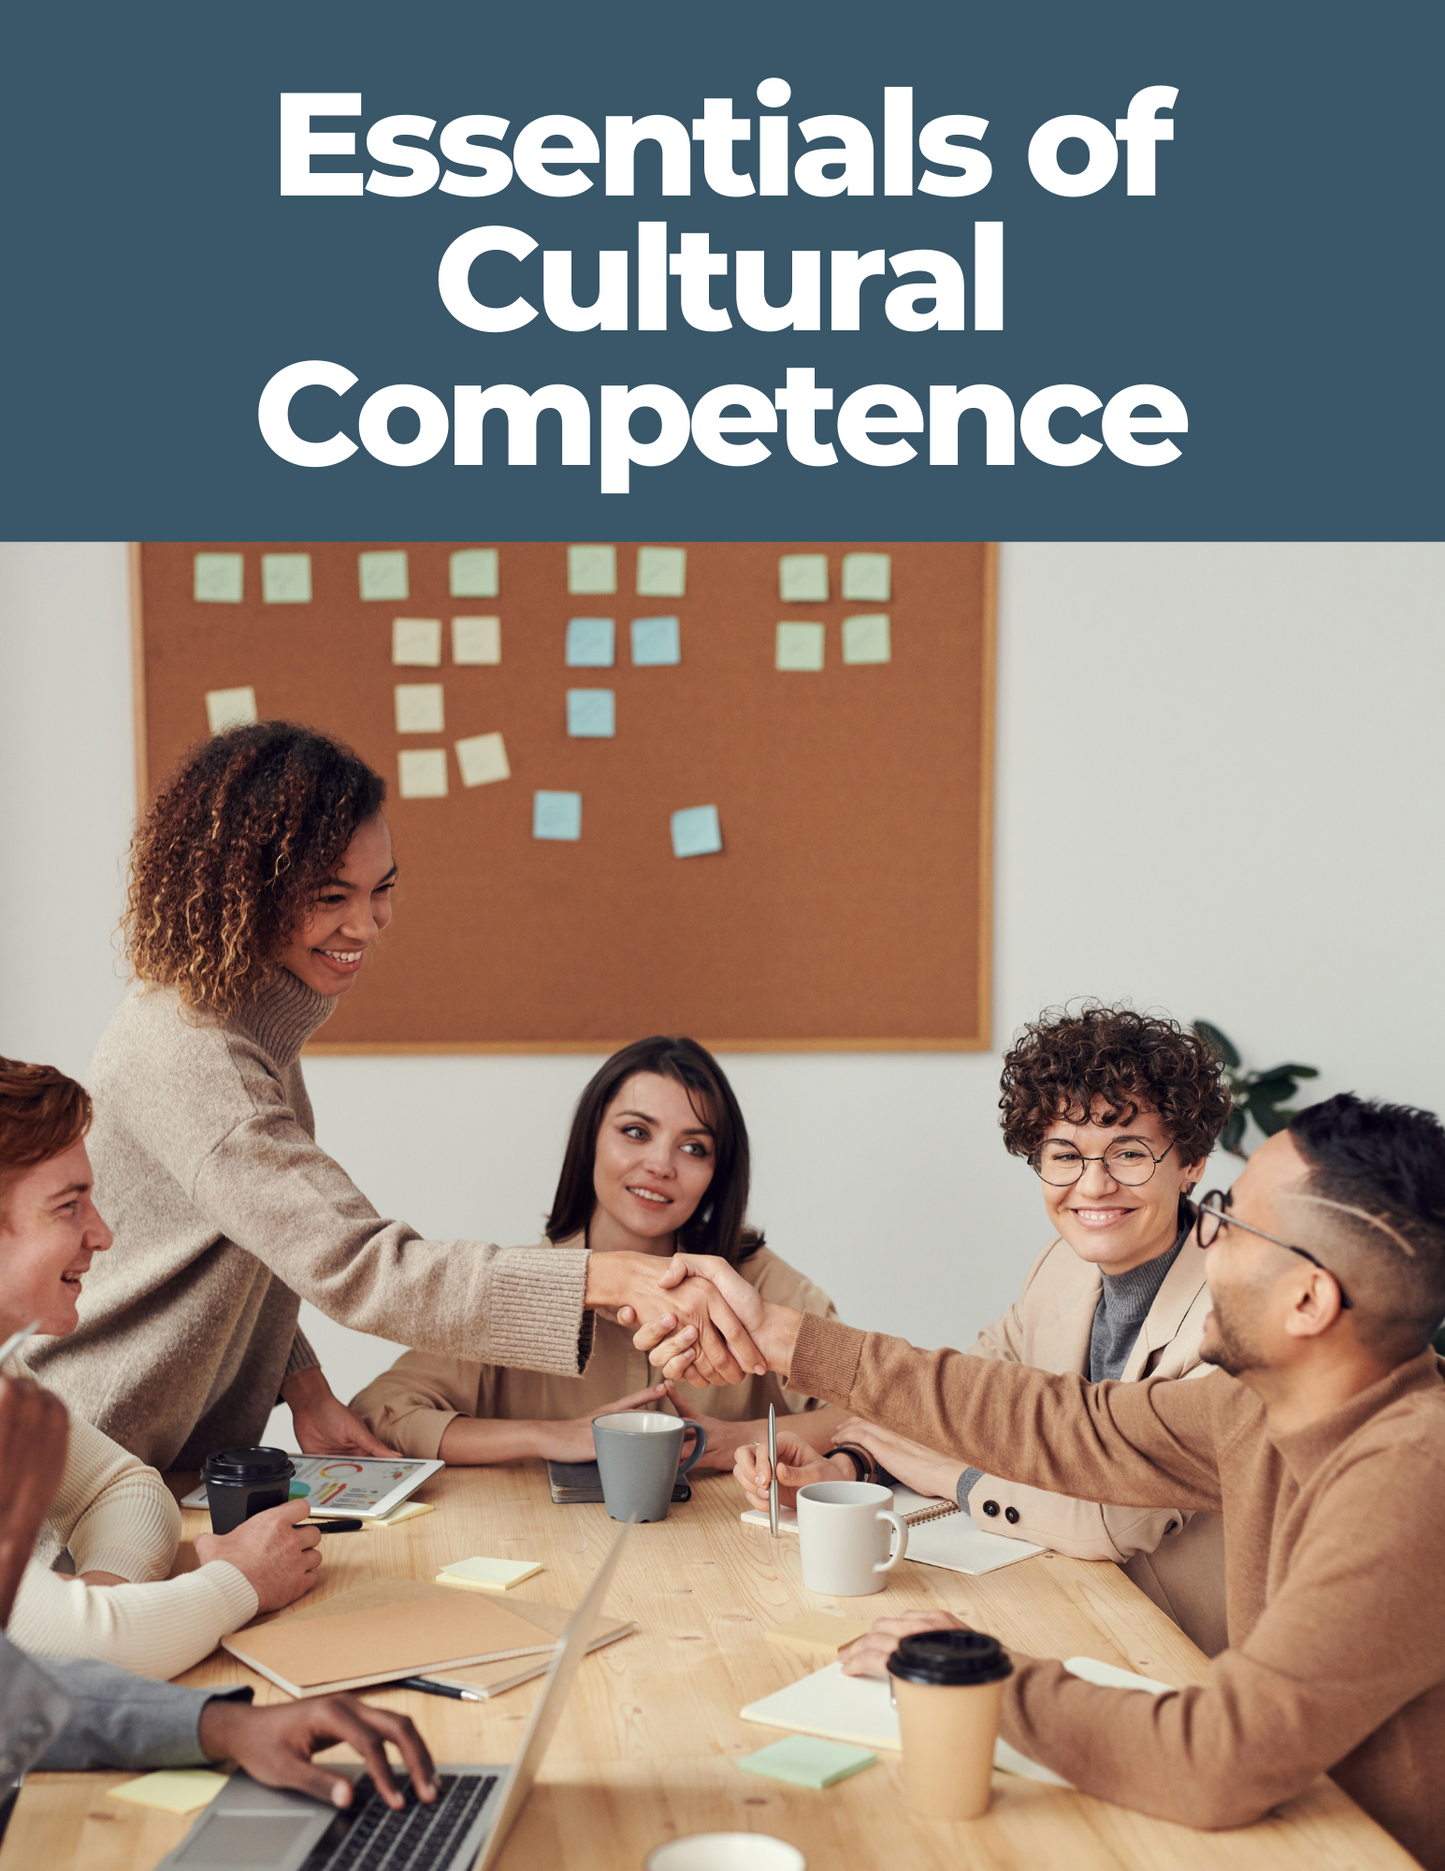 Essentials of Cultural Competence